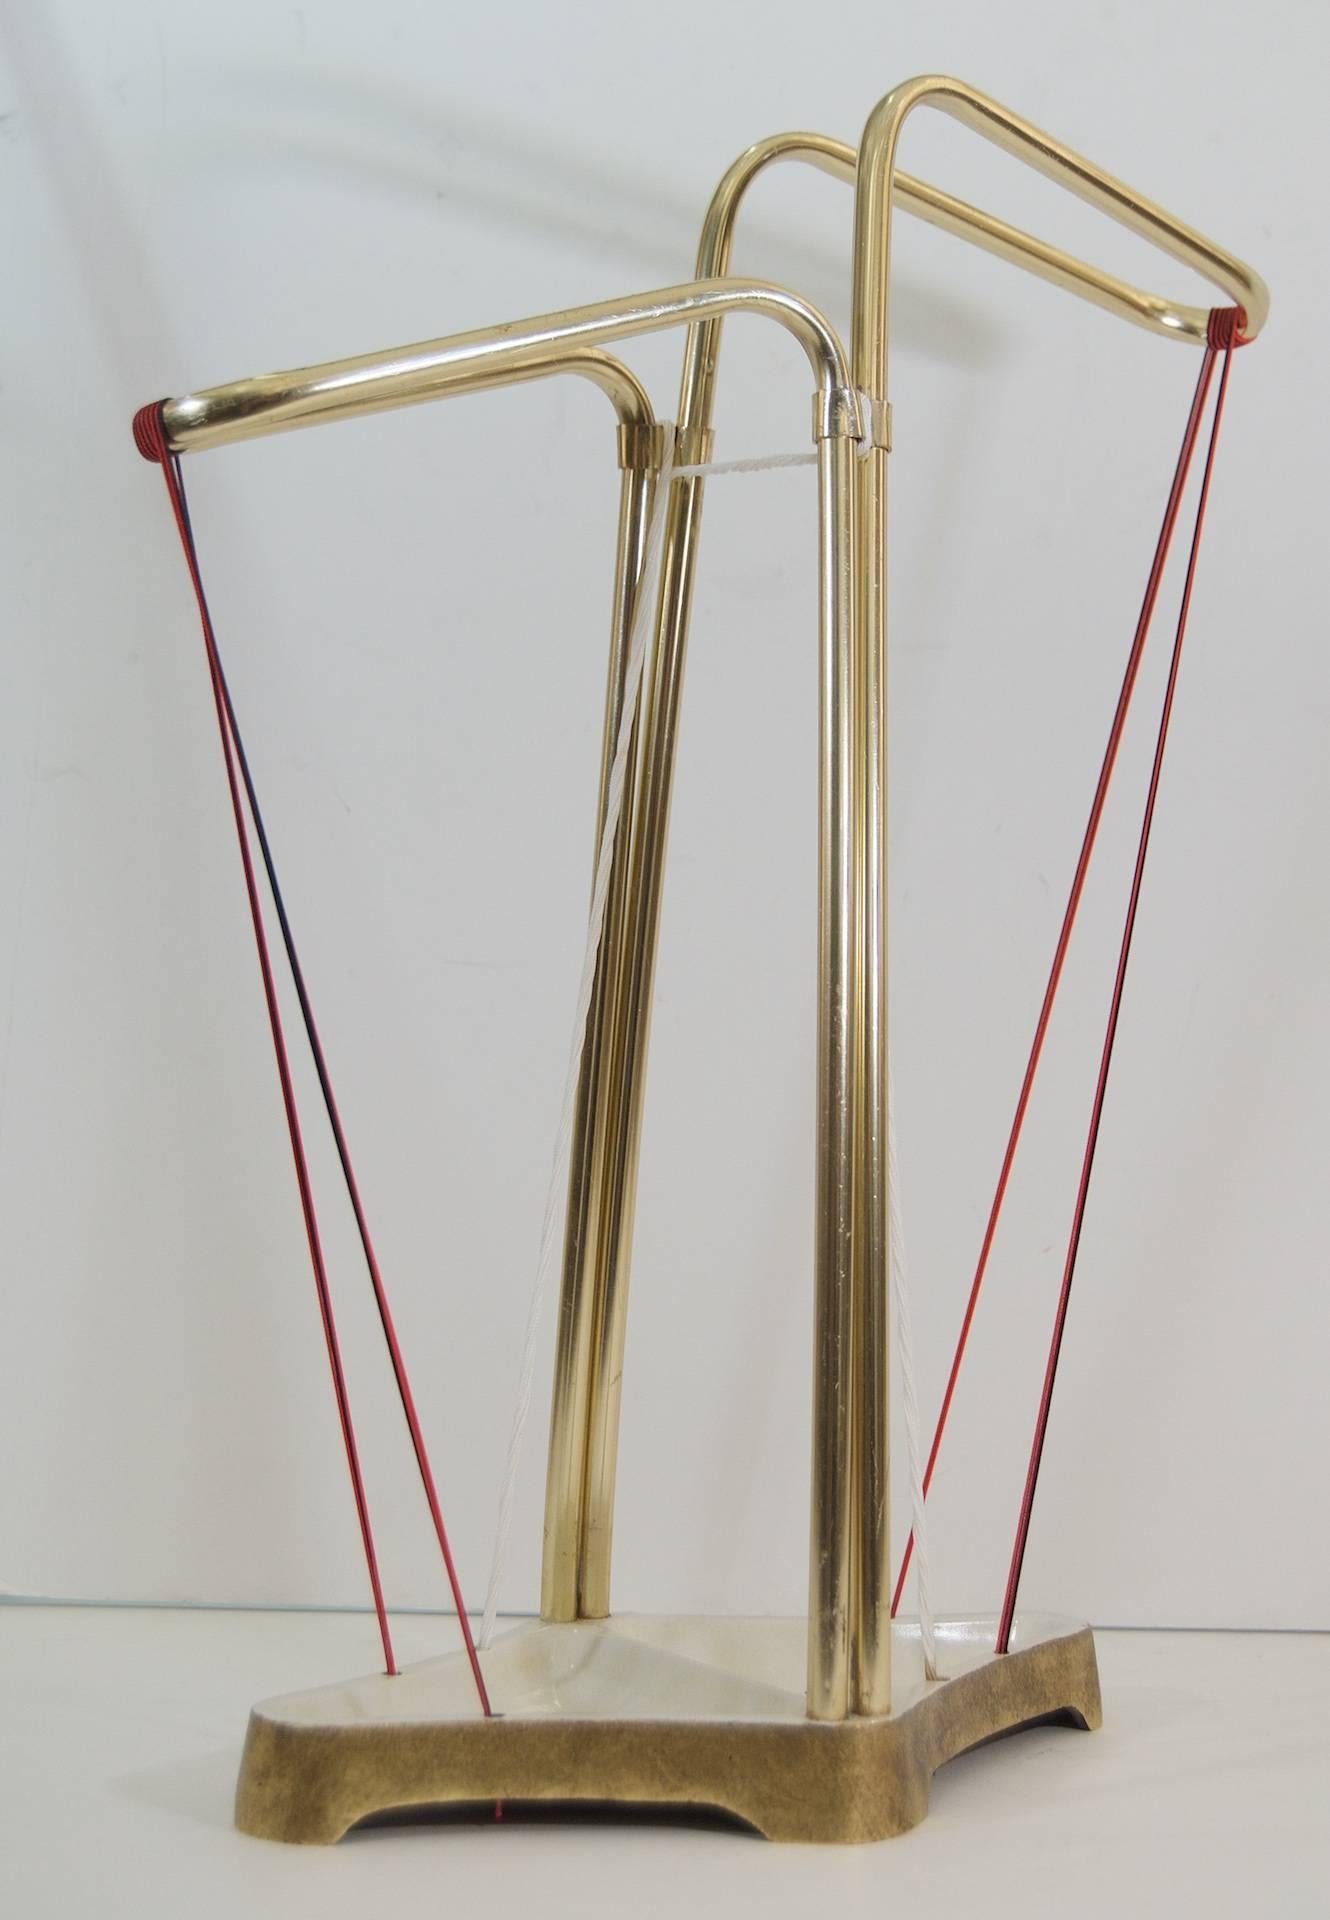 Excellent Mid-Century umbrella stand, the brass arm supports mounted on an enameled and gilt iron base, supported and bound by red, black and white cording.